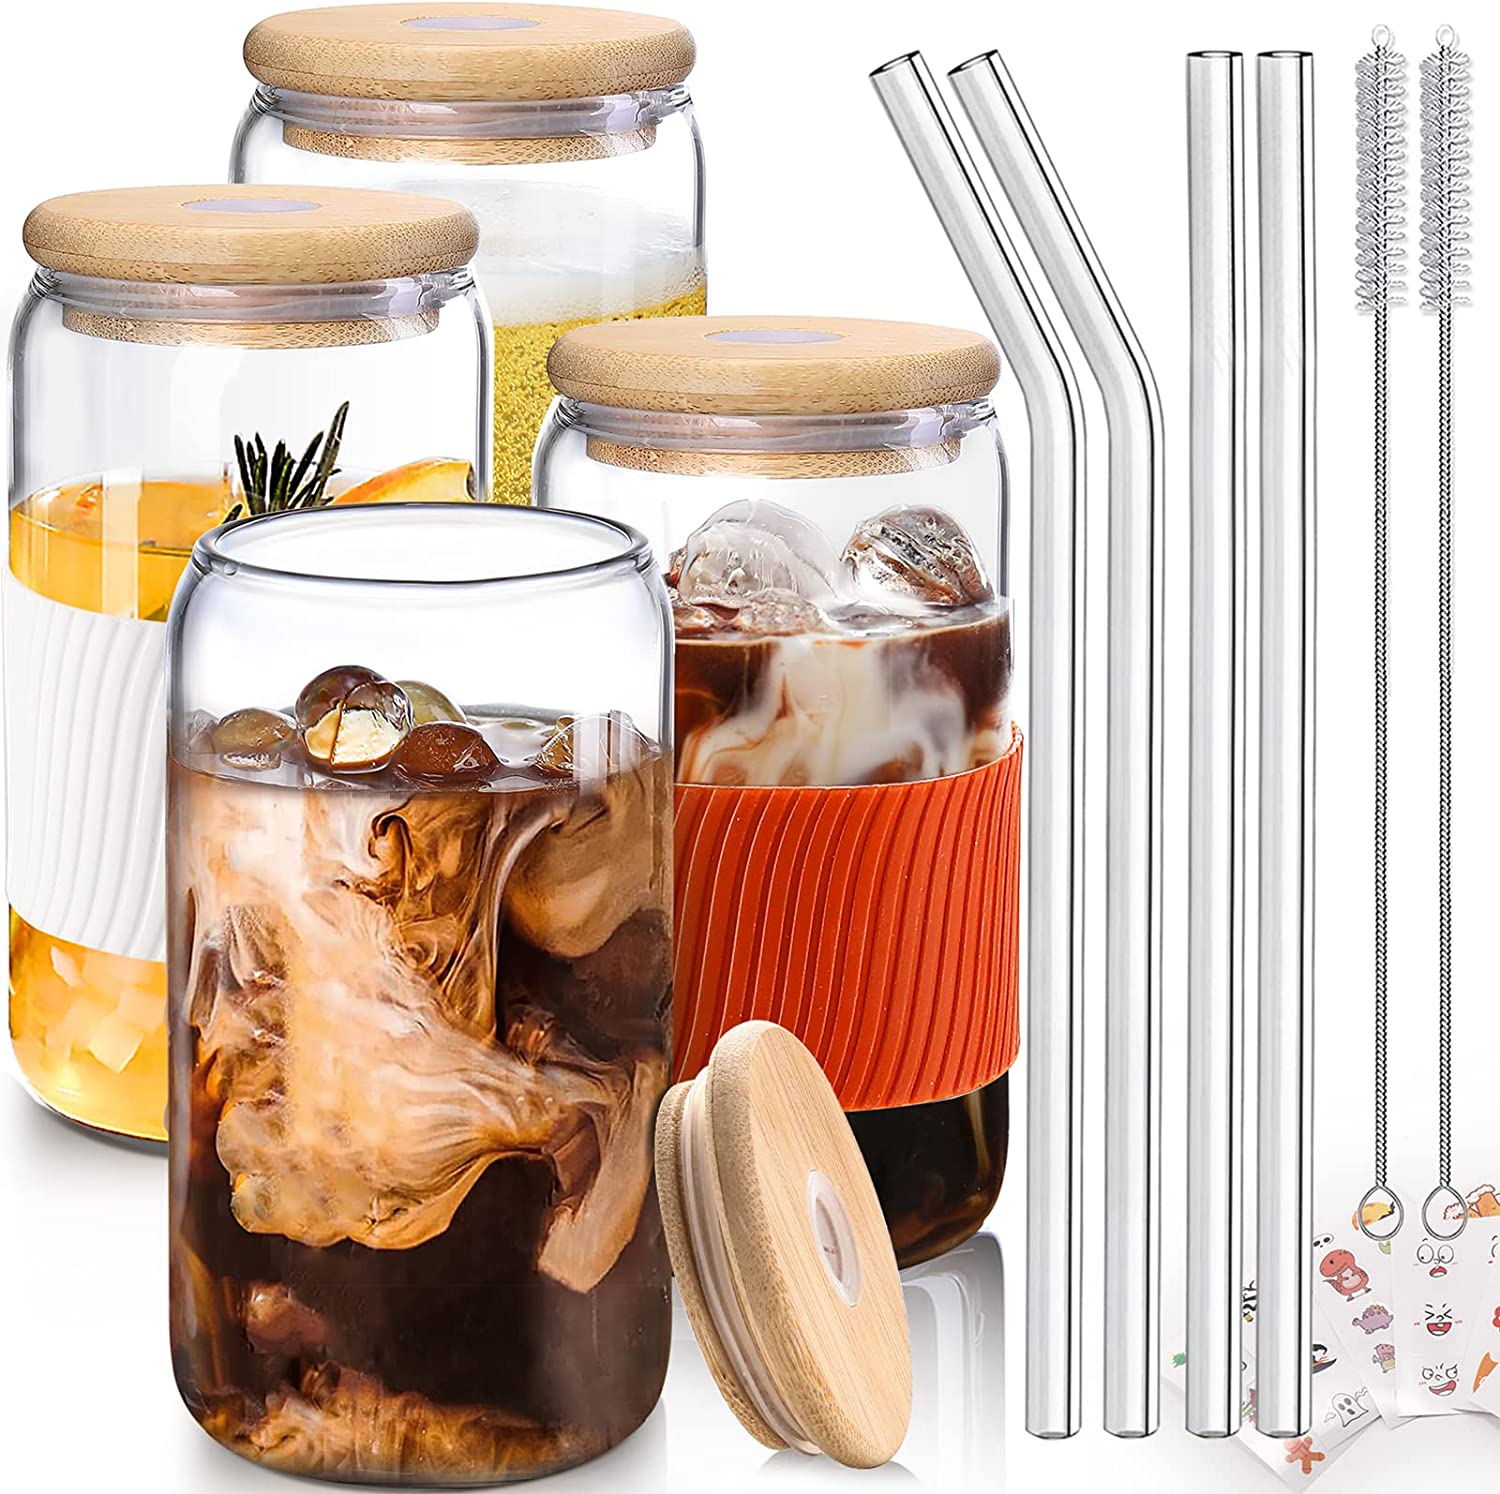  HOMBERKING Glass Cups with Bamboo Lids and Straws 4pcs